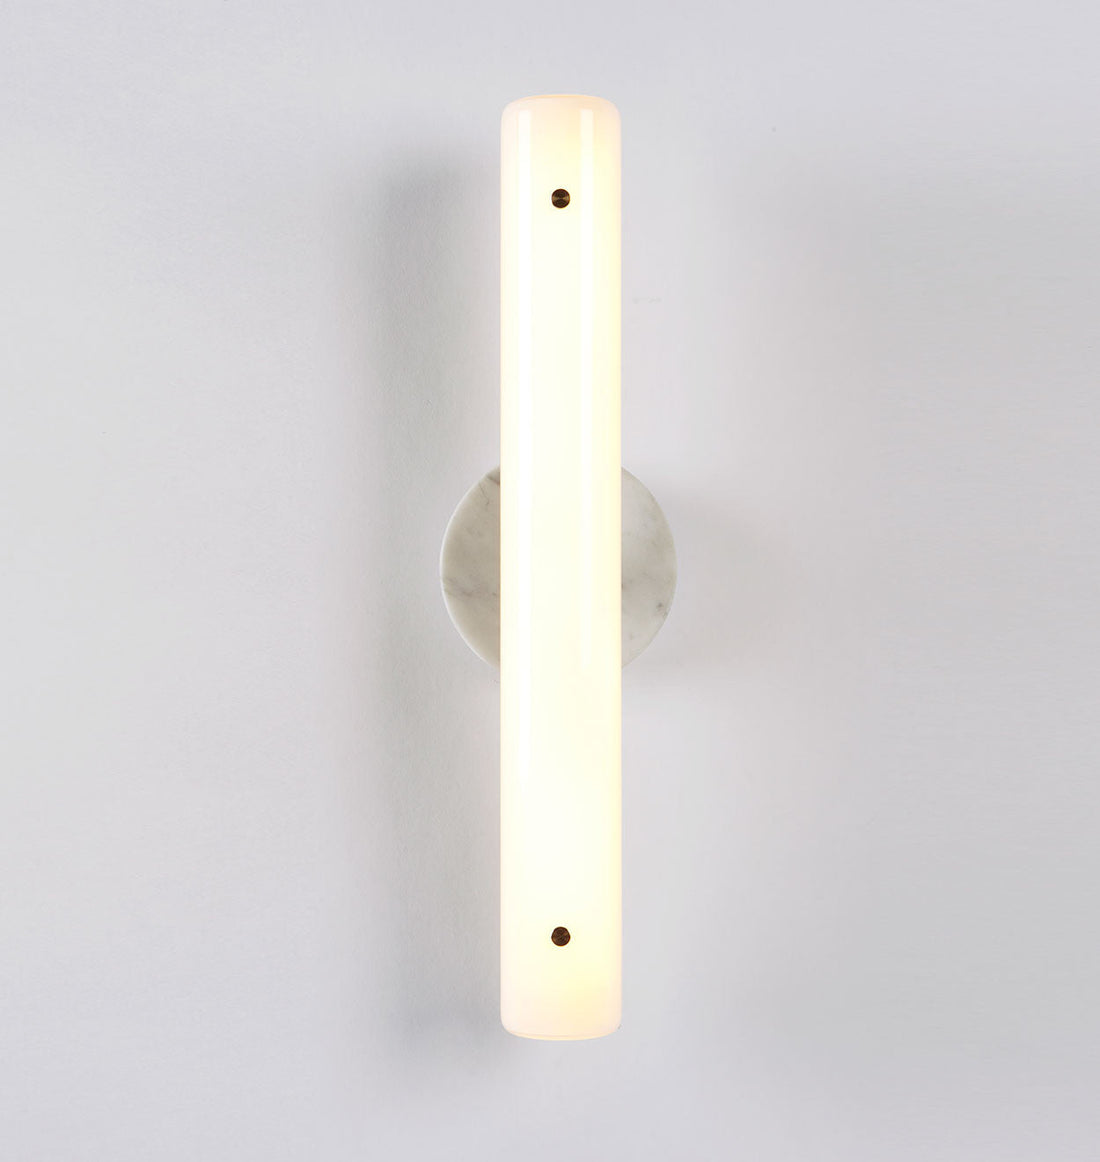 Counterweight Sconce - Circle